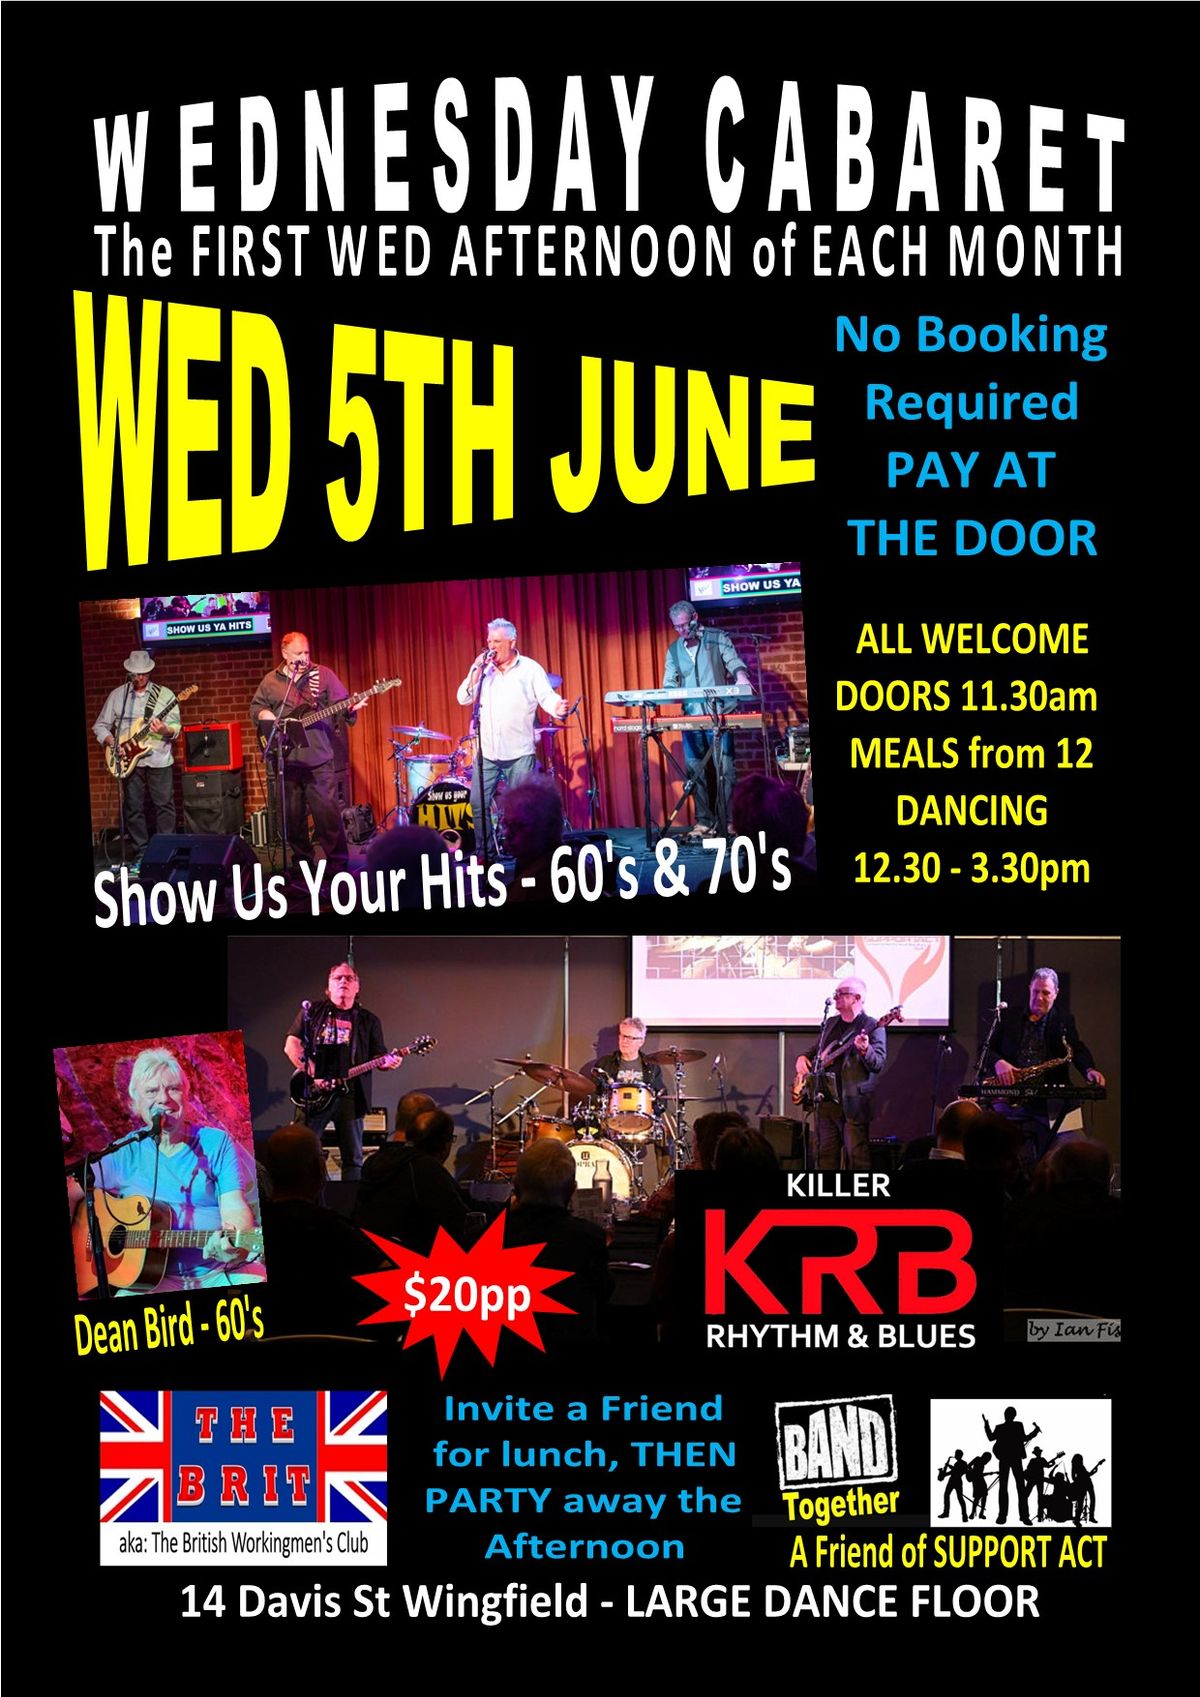 WED AFTERNOON CABARET at THE BRIT - 5TH JUNE